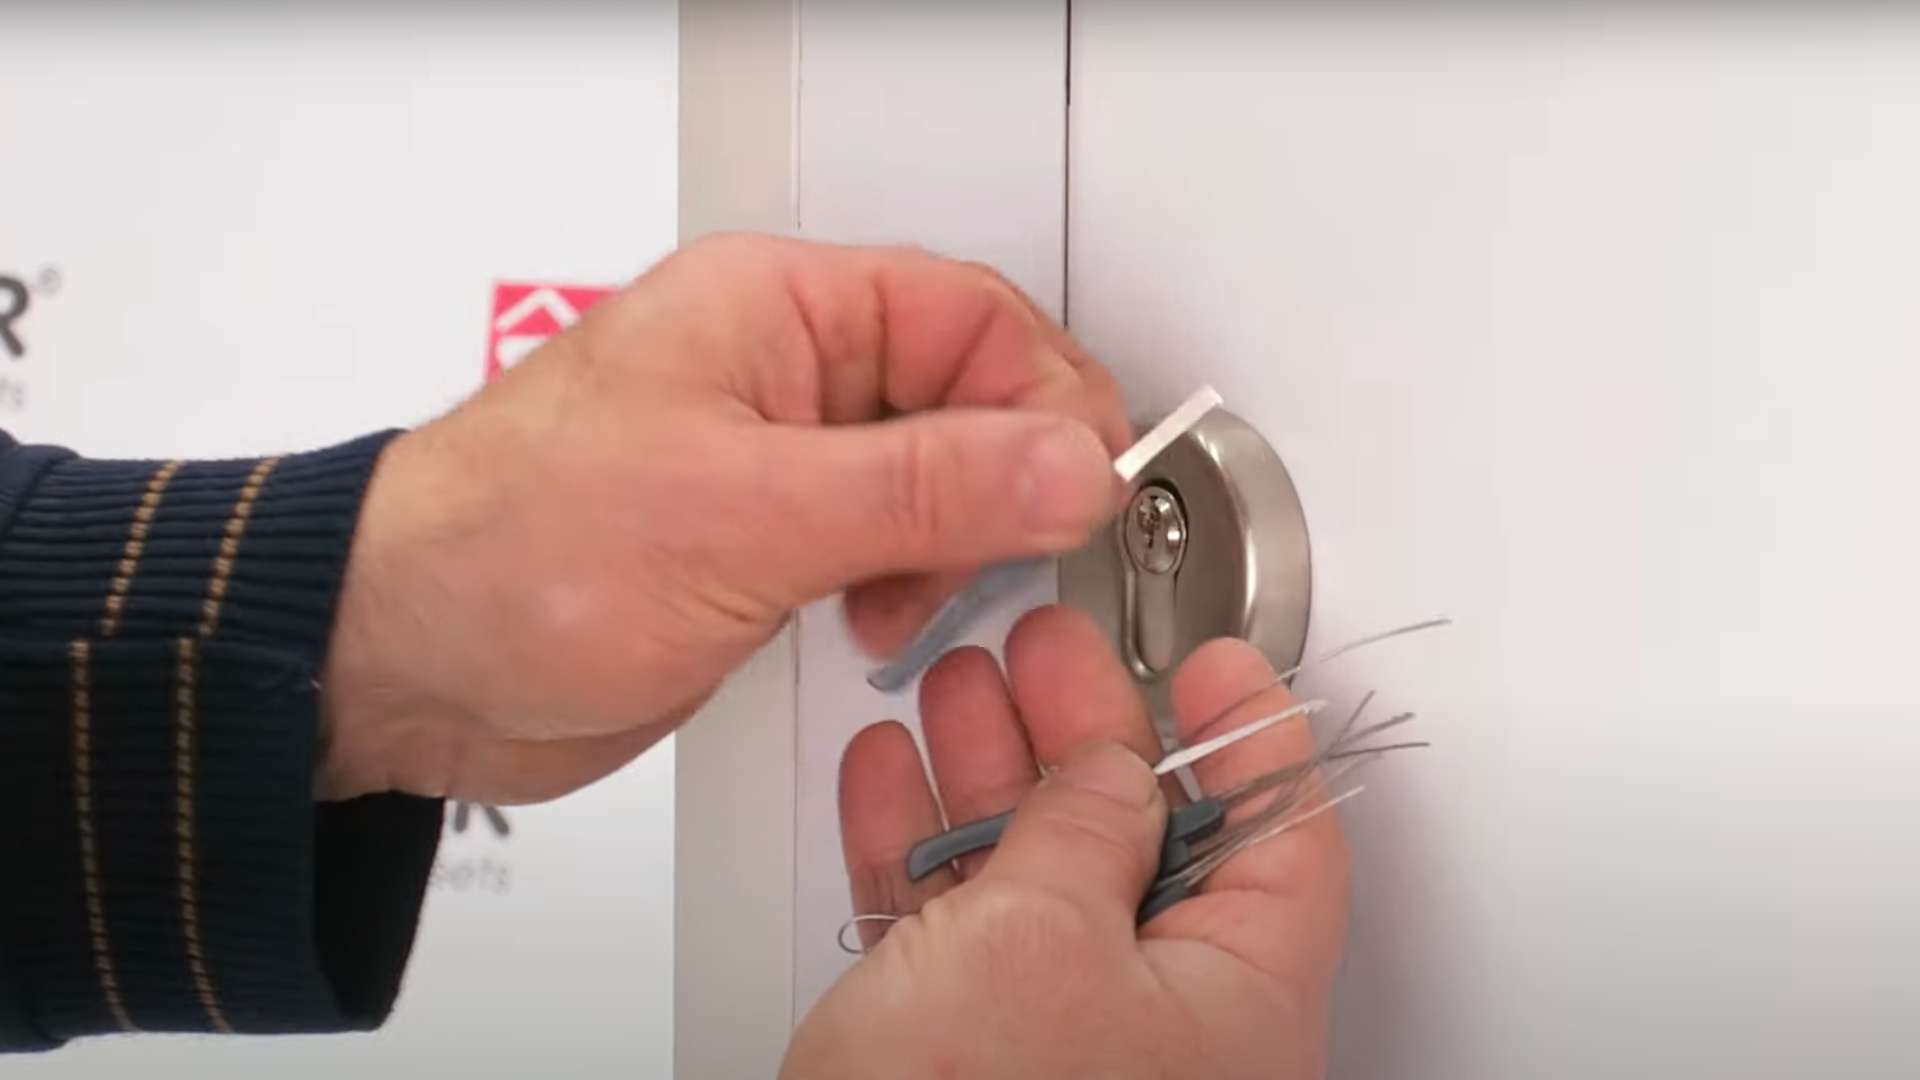 A locksmith choosing the right picking tool during a broken key extraction